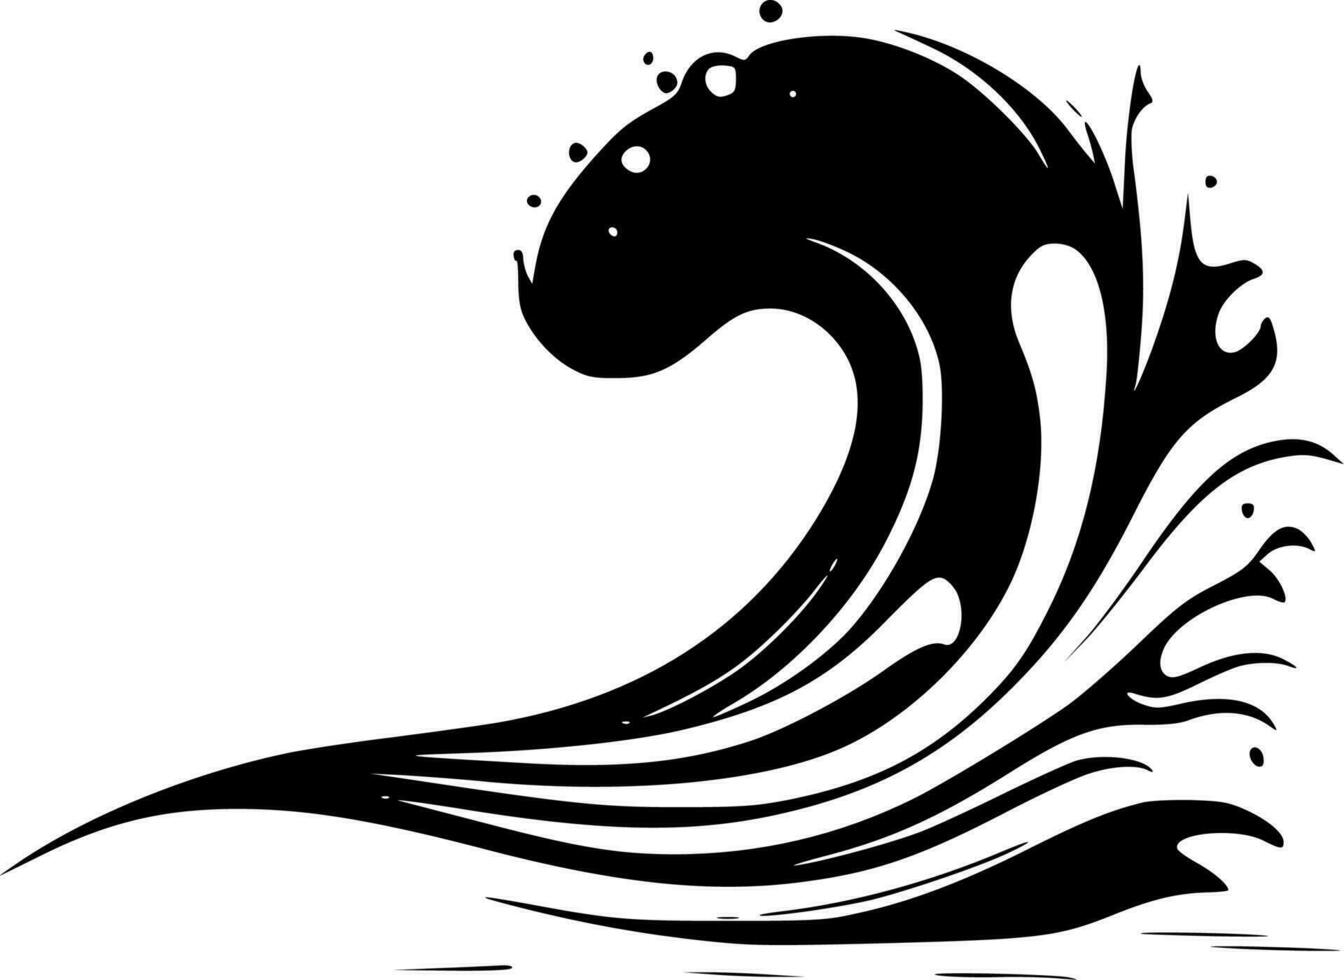 Wave - Black and White Isolated Icon - Vector illustration